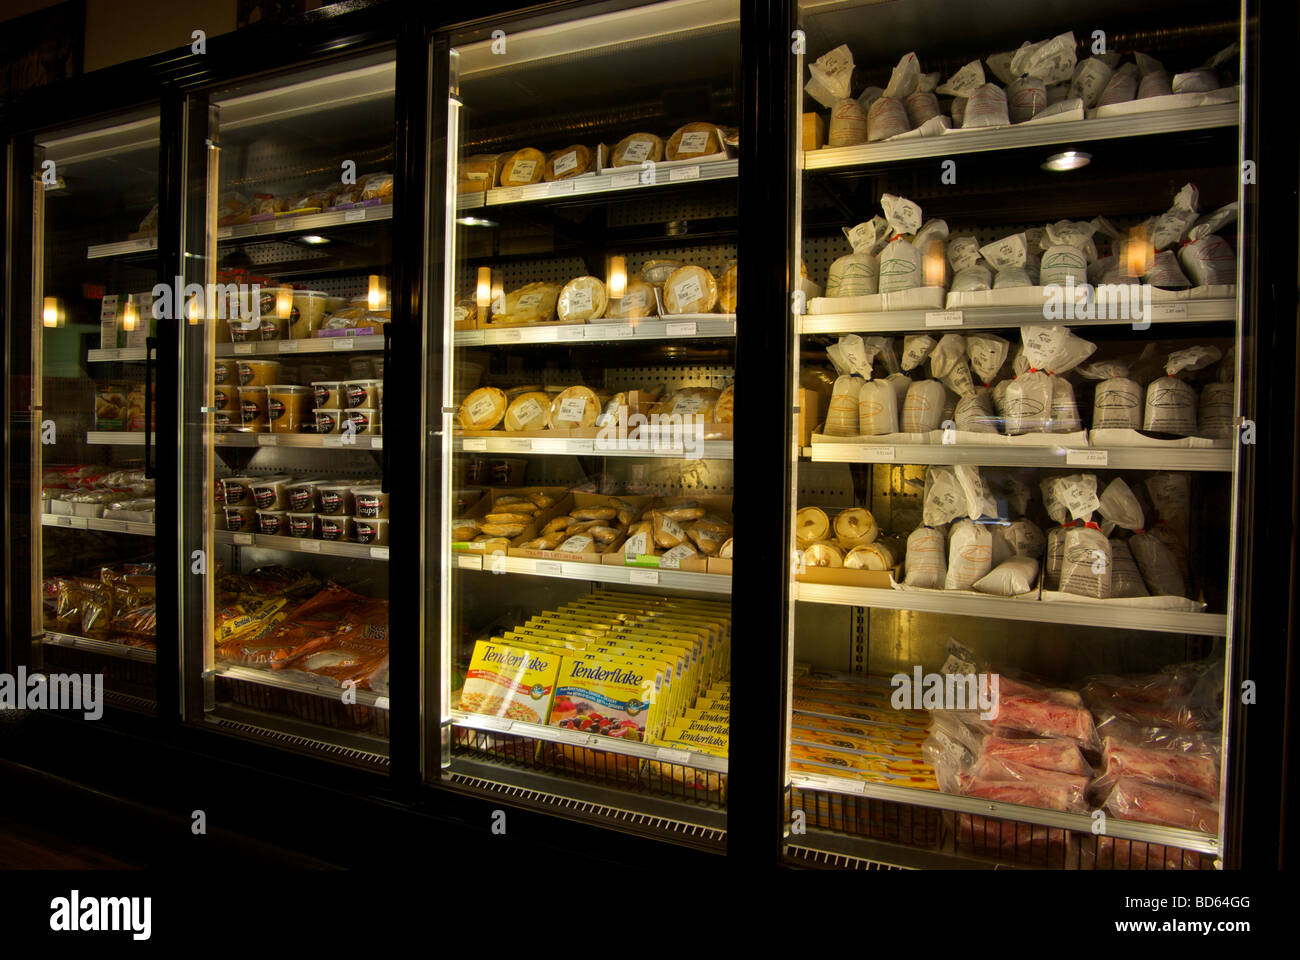 Upright freezer display case in small retail grocery store Stock Photo